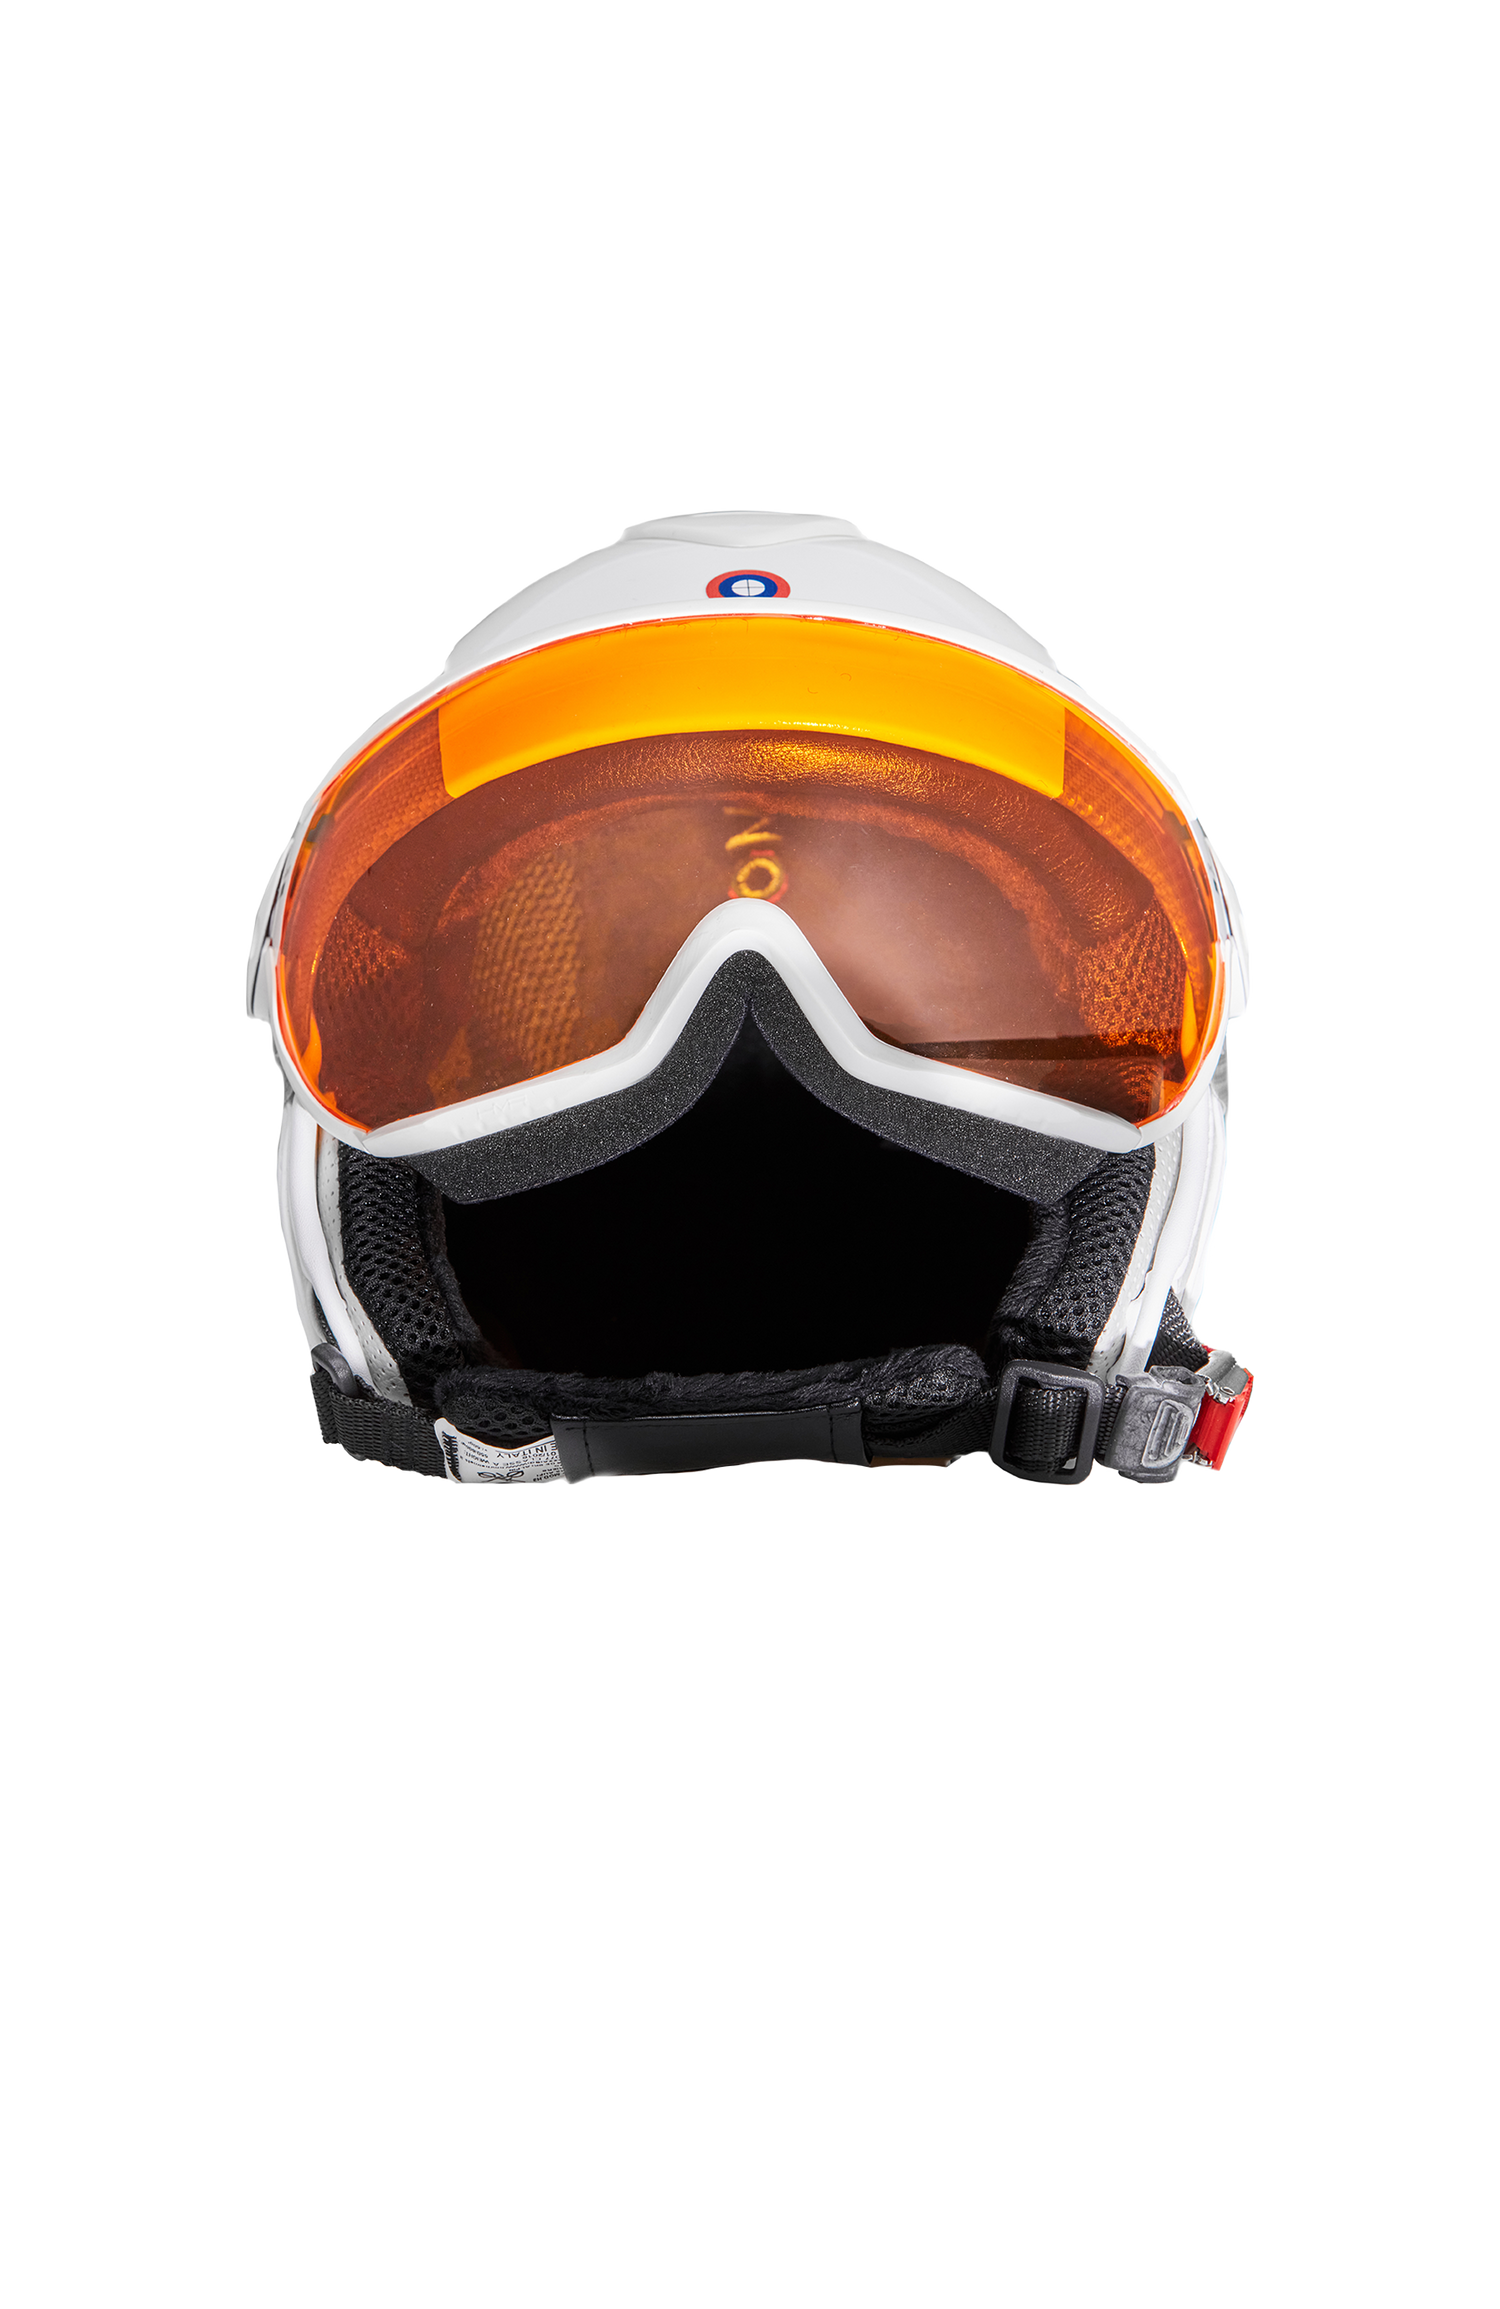 Helmet -LVS- open with goggles, white